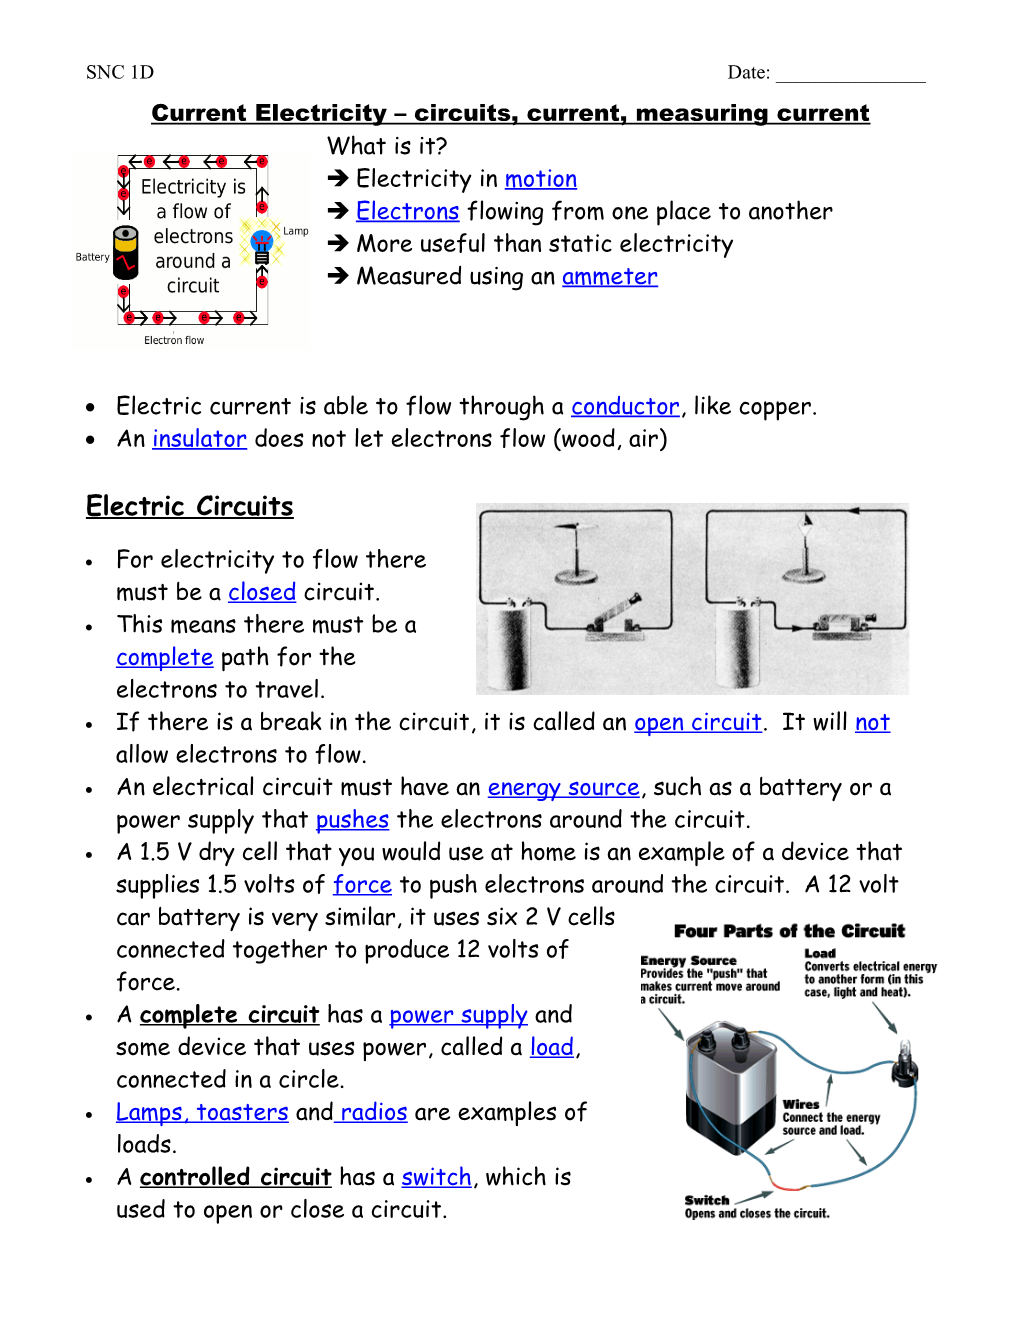 Current Electricity Circuits, Current, Measuring Current